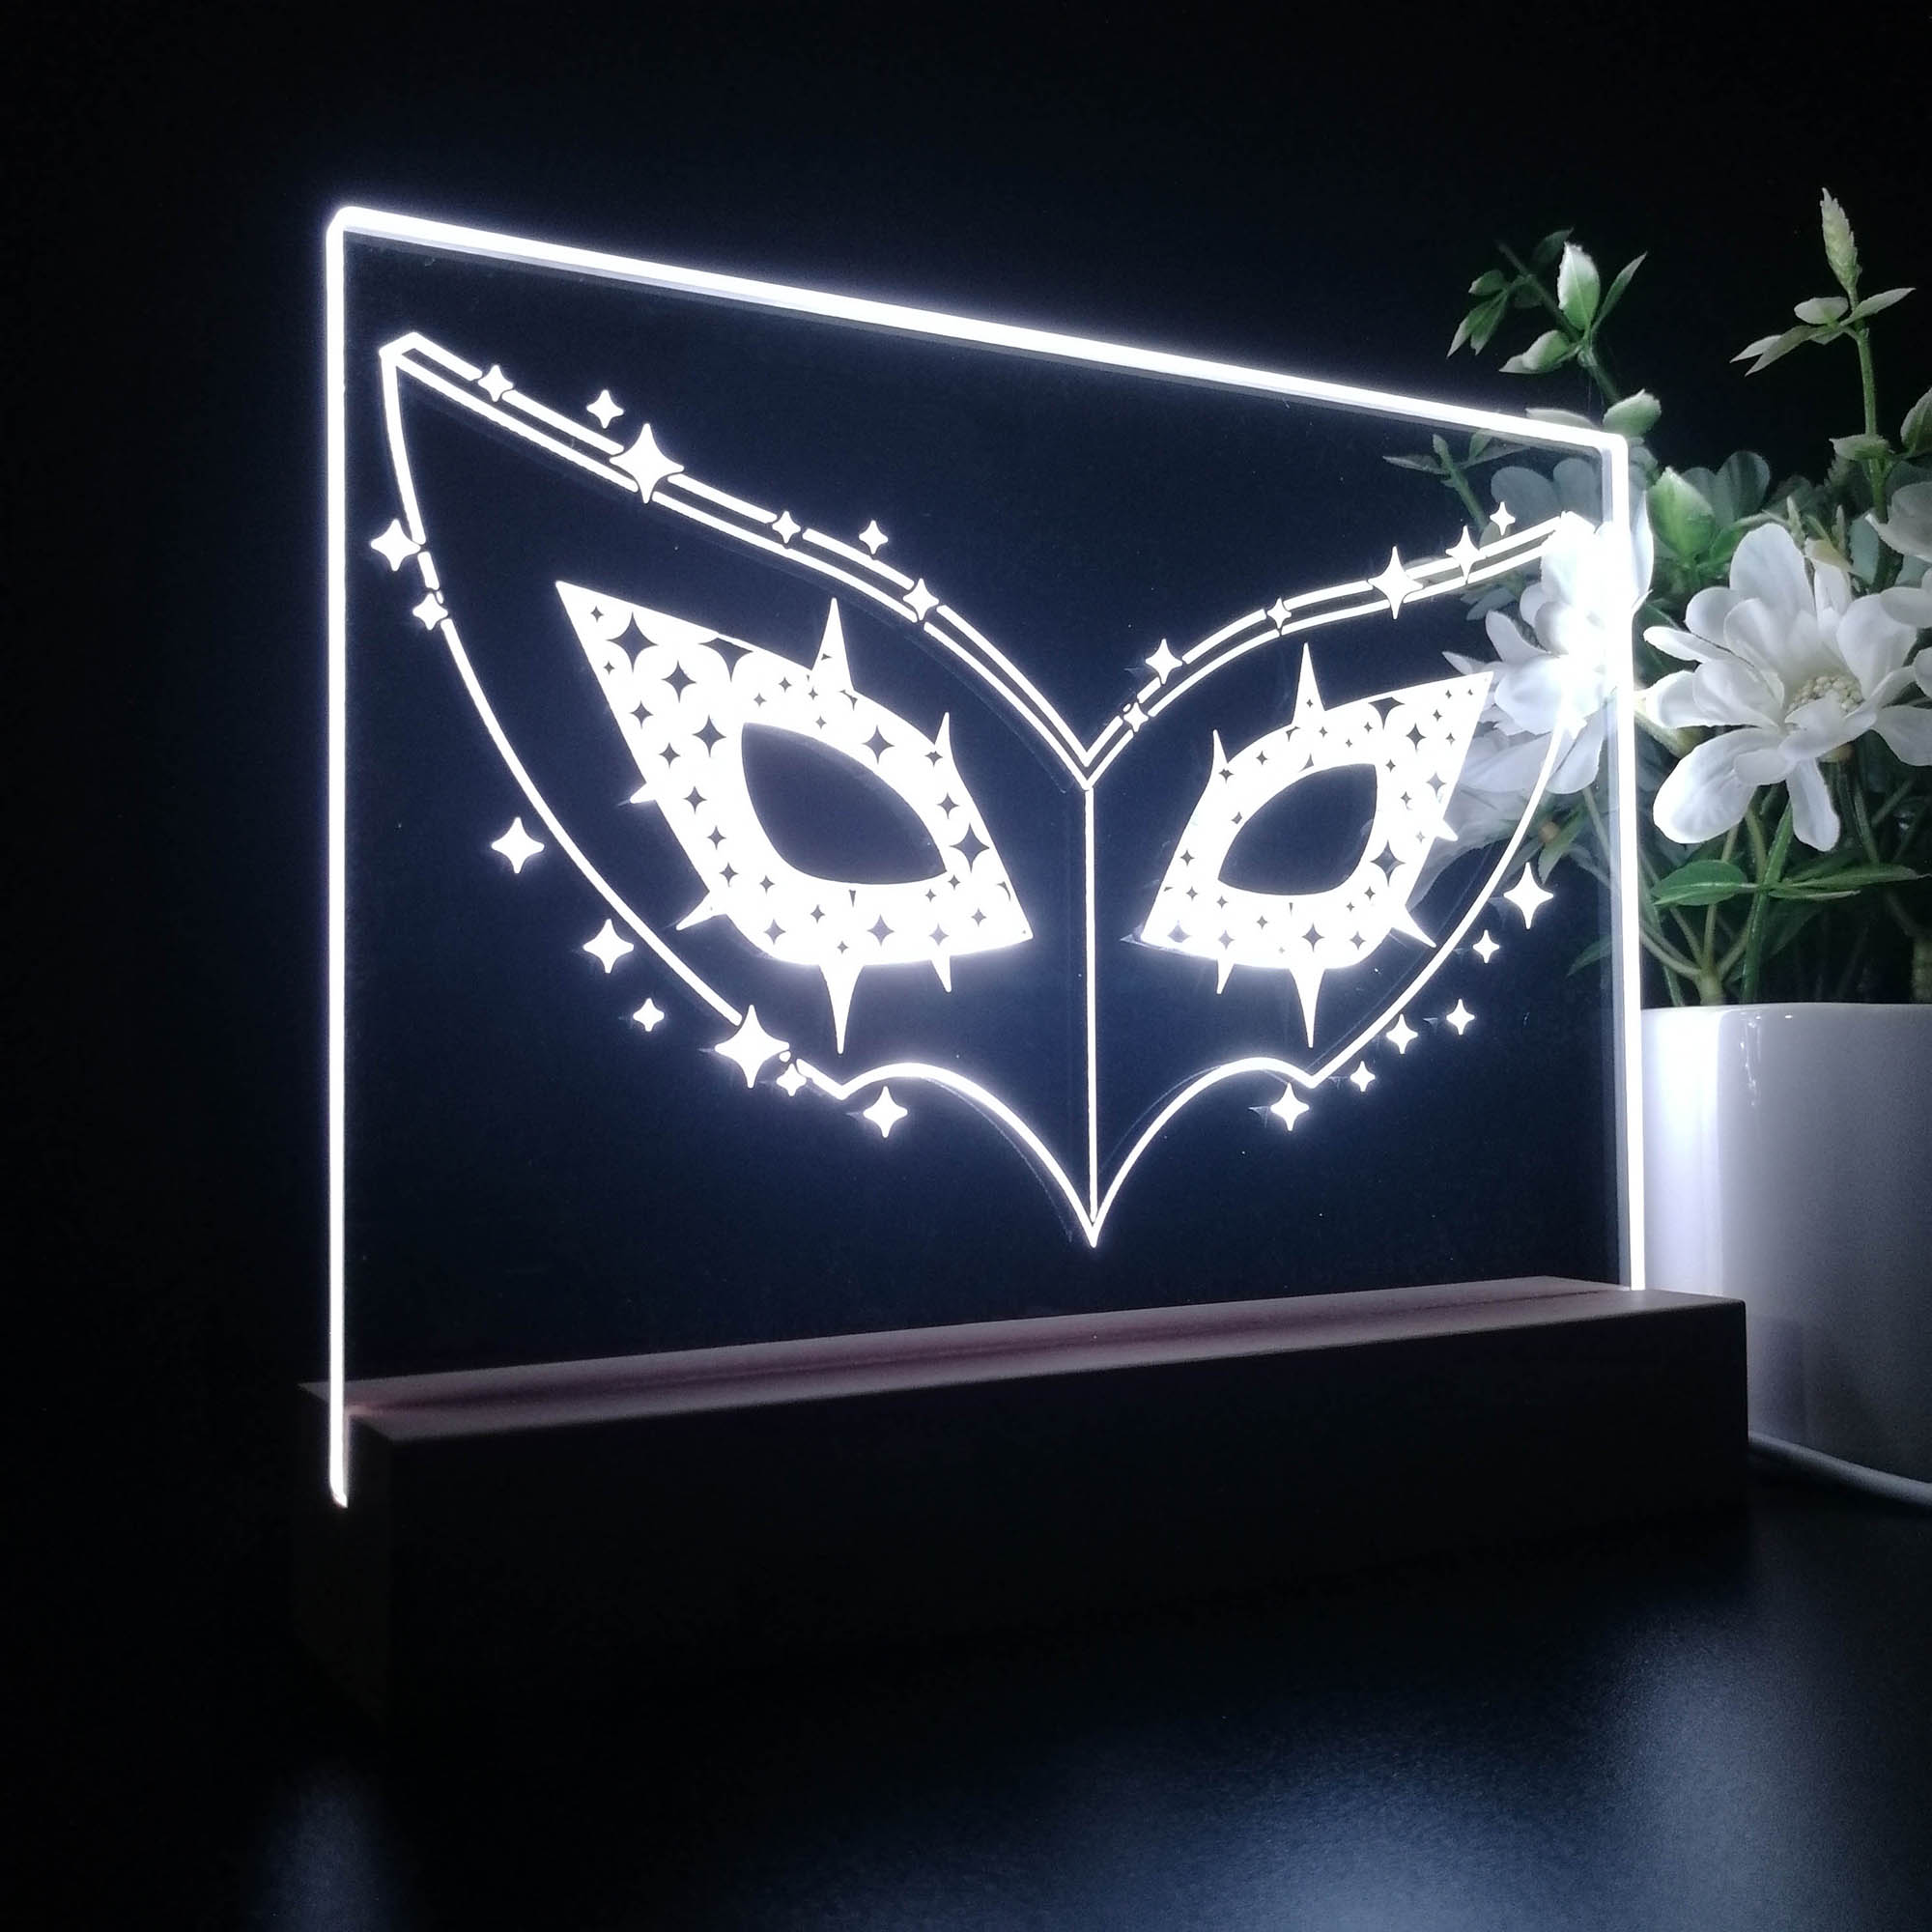 Persona 5 Eye Mask Neon Sign Game Room Lamp